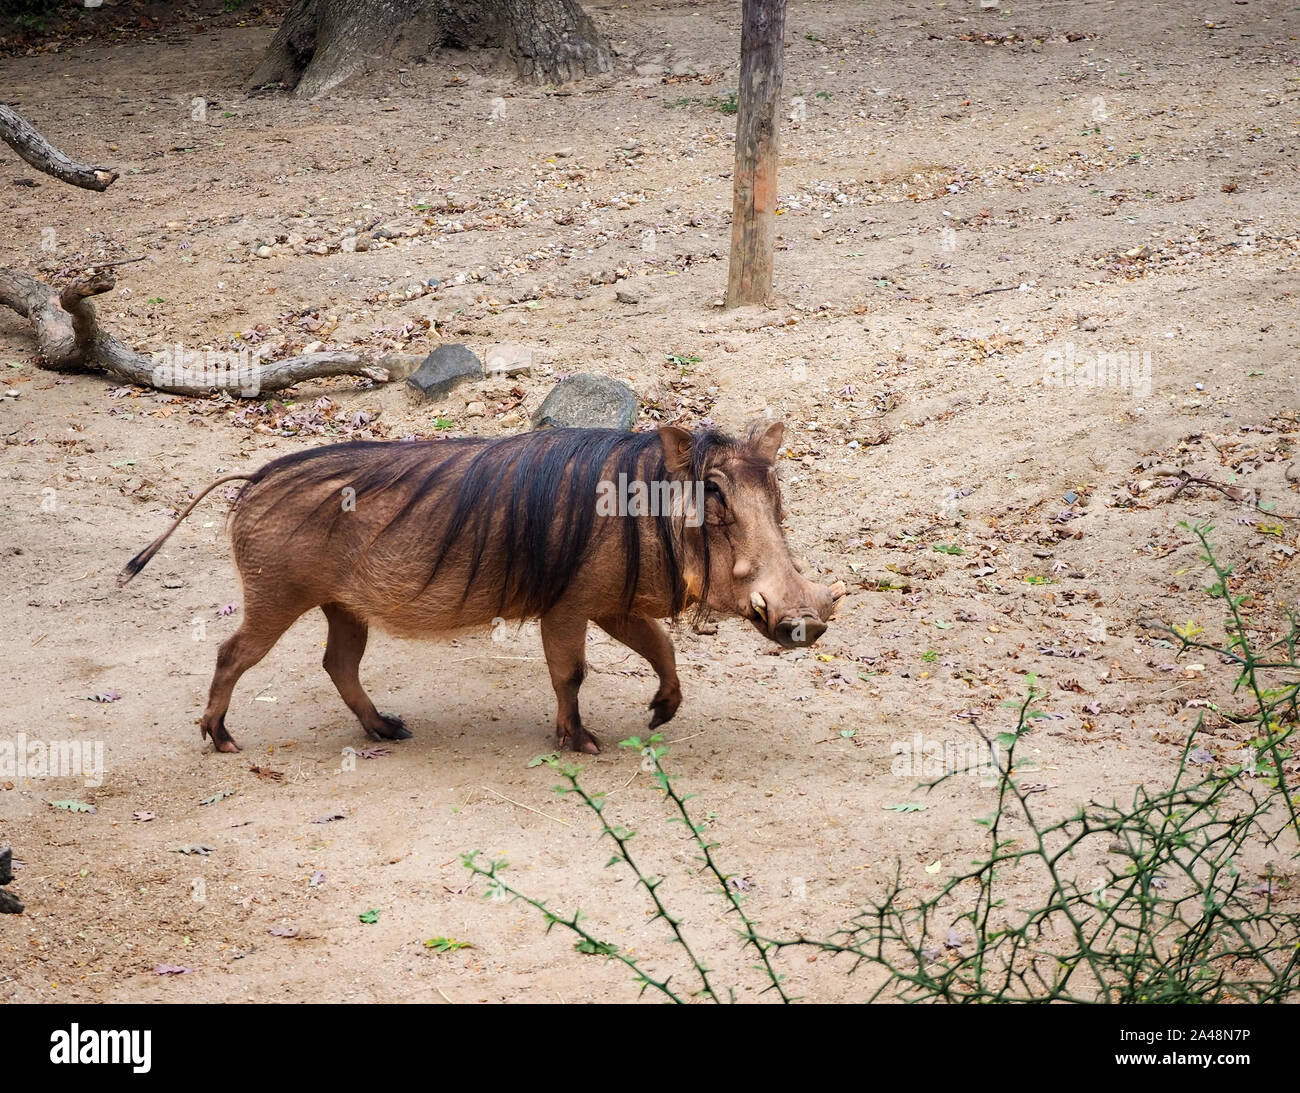 A large warthog saunters along casually gazing back at the viewer. Stock Photo